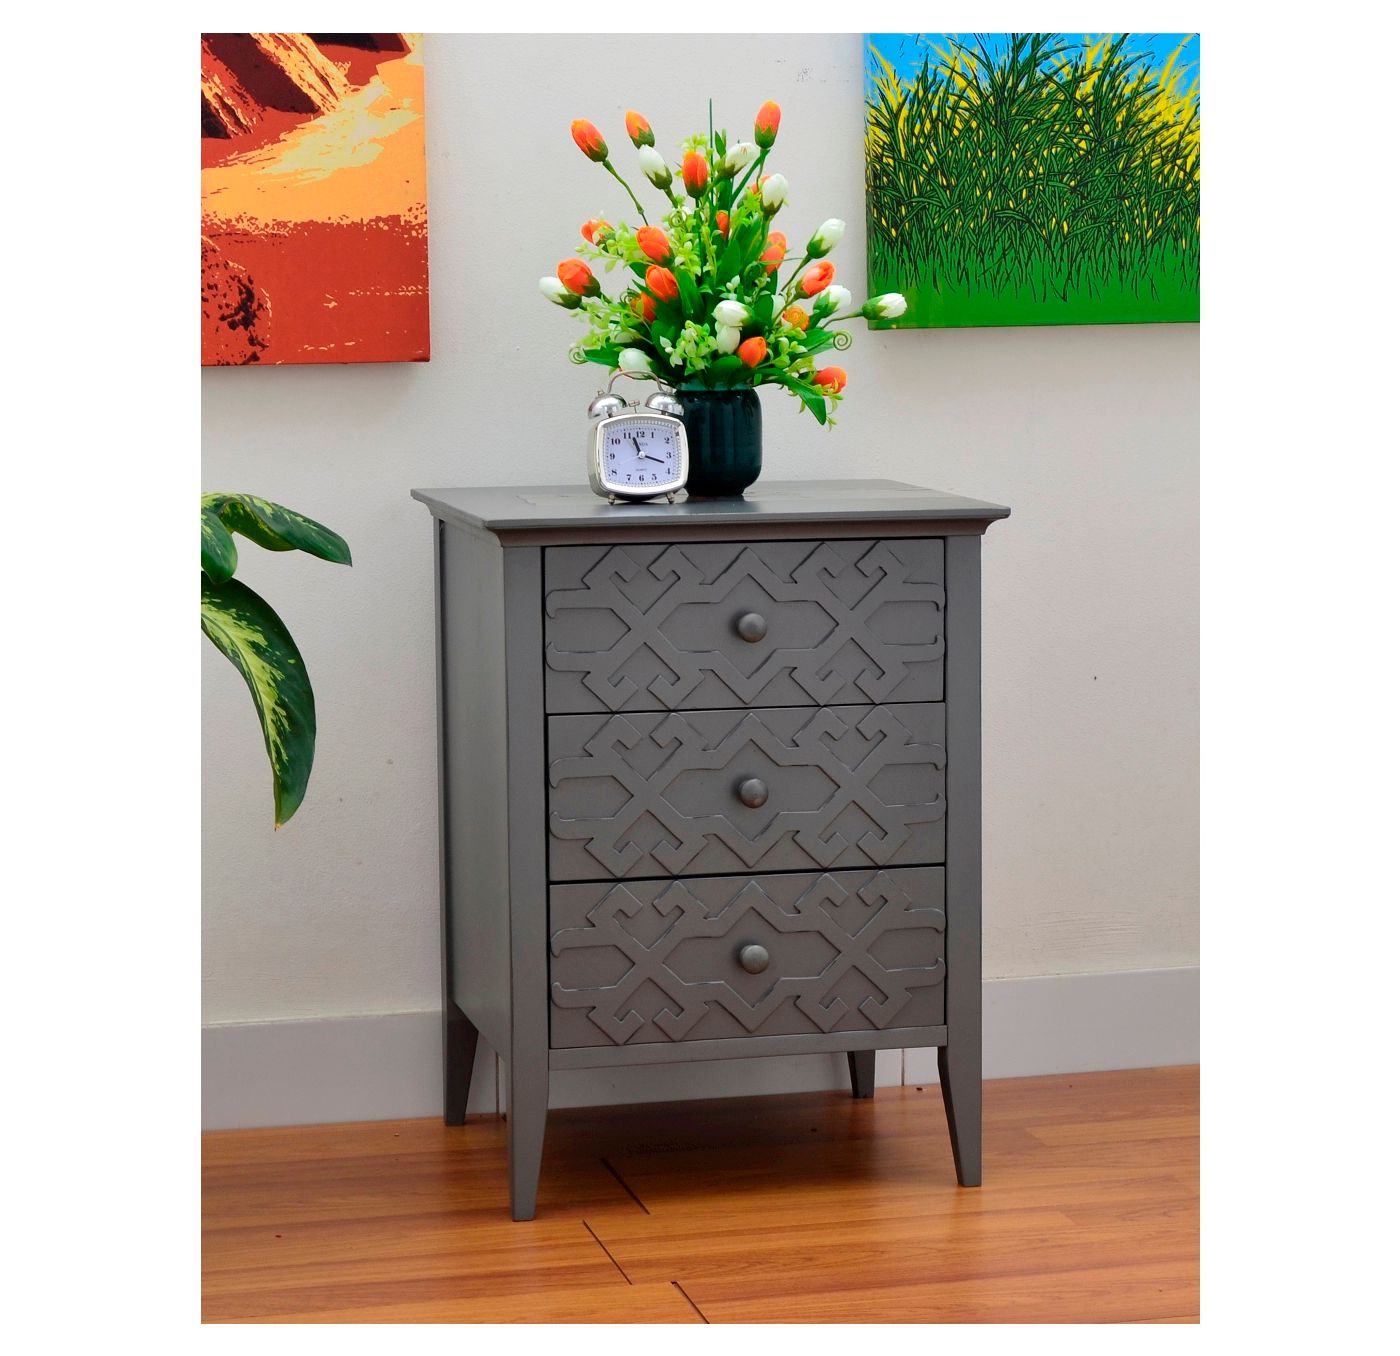 Fretwork Accent Table